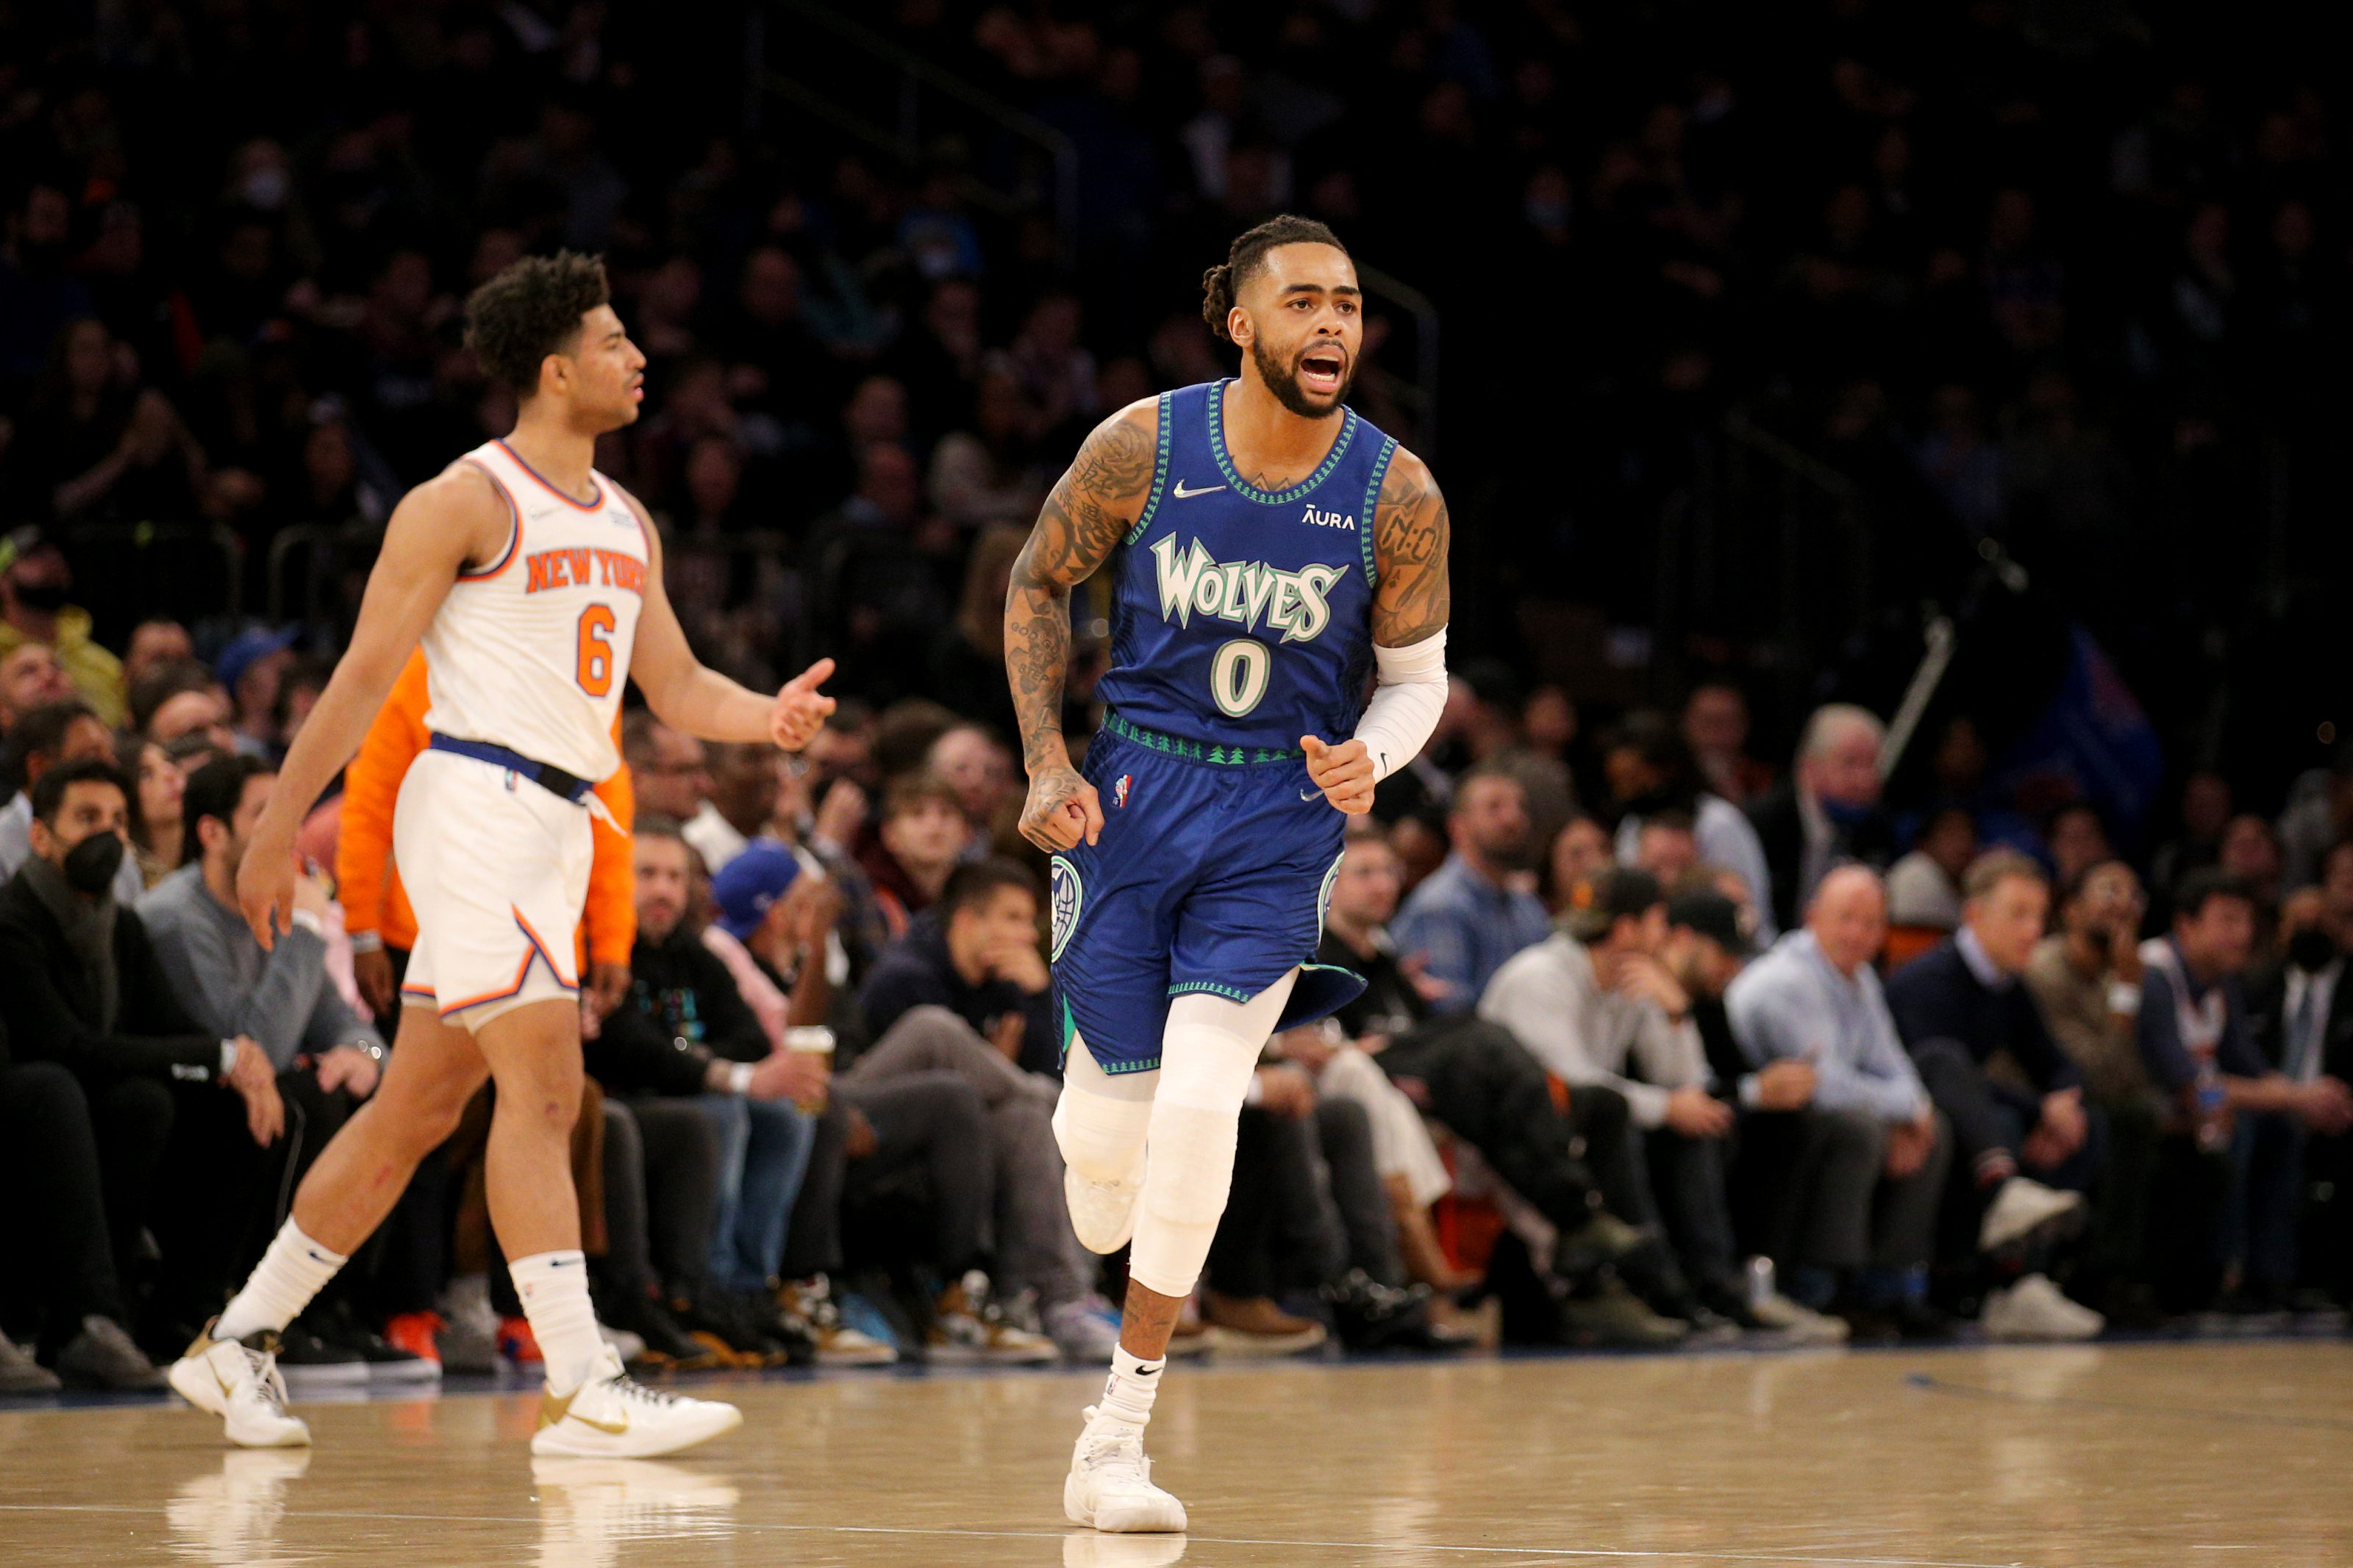 D'Angelo Russell rumors: Suns, Lakers, Nets, Timberwolves in play?